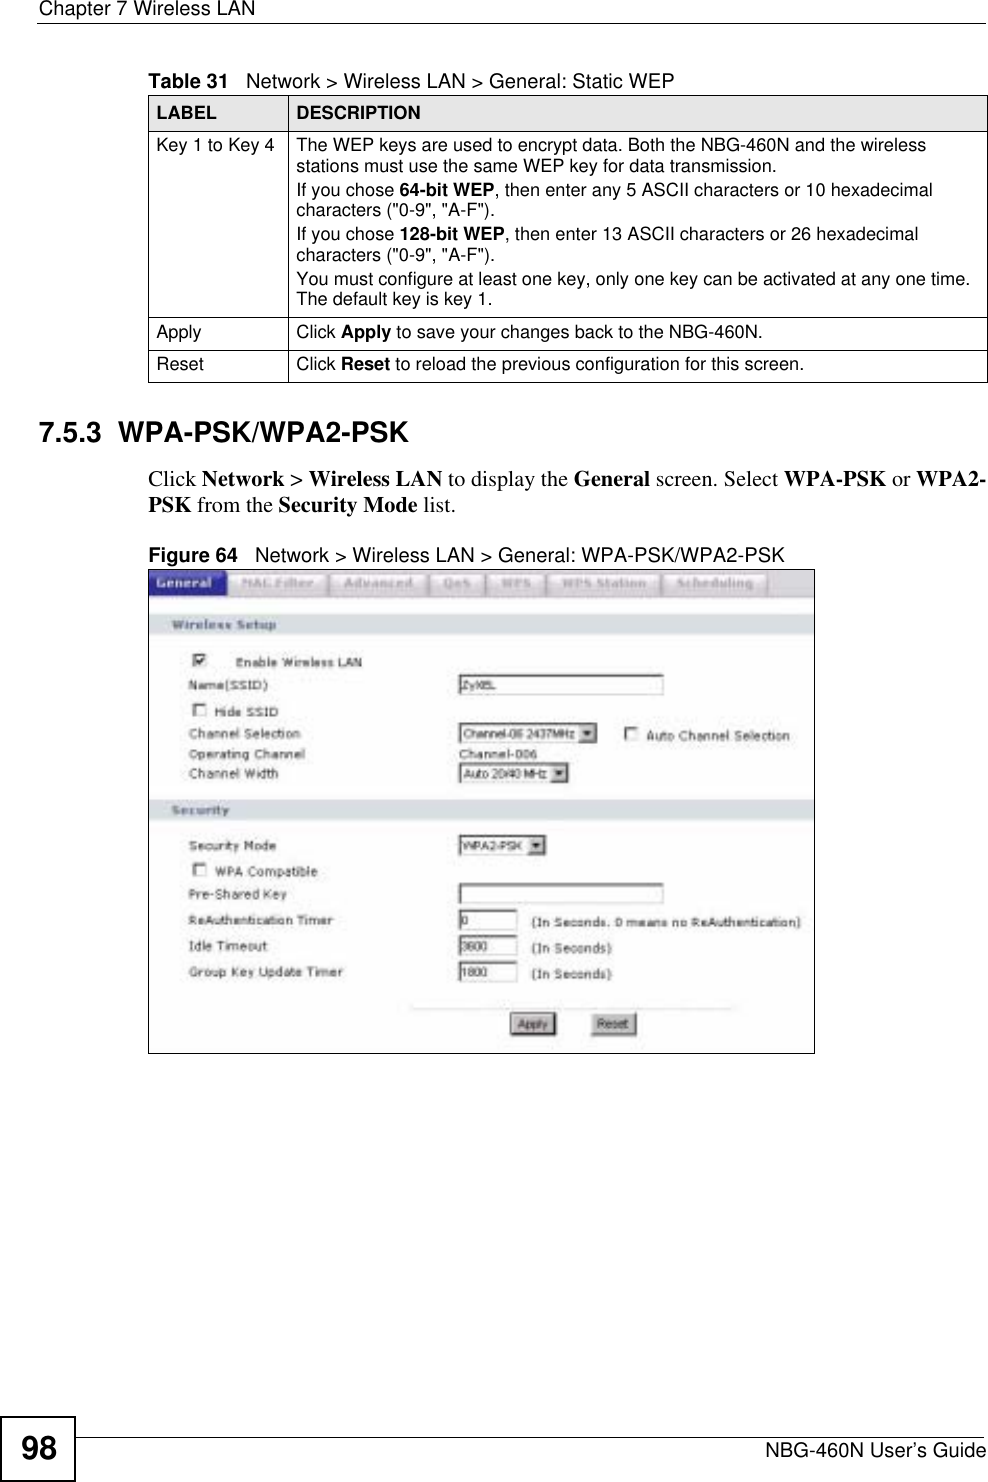 Chapter 7 Wireless LANNBG-460N User’s Guide987.5.3  WPA-PSK/WPA2-PSKClick Network &gt; Wireless LAN to display the General screen. Select WPA-PSK or WPA2-PSK from the Security Mode list.Figure 64   Network &gt; Wireless LAN &gt; General: WPA-PSK/WPA2-PSKKey 1 to Key 4 The WEP keys are used to encrypt data. Both the NBG-460N and the wireless stations must use the same WEP key for data transmission.If you chose 64-bit WEP, then enter any 5 ASCII characters or 10 hexadecimal characters (&quot;0-9&quot;, &quot;A-F&quot;).If you chose 128-bit WEP, then enter 13 ASCII characters or 26 hexadecimal characters (&quot;0-9&quot;, &quot;A-F&quot;). You must configure at least one key, only one key can be activated at any one time. The default key is key 1.Apply Click Apply to save your changes back to the NBG-460N.Reset Click Reset to reload the previous configuration for this screen.Table 31   Network &gt; Wireless LAN &gt; General: Static WEPLABEL DESCRIPTION